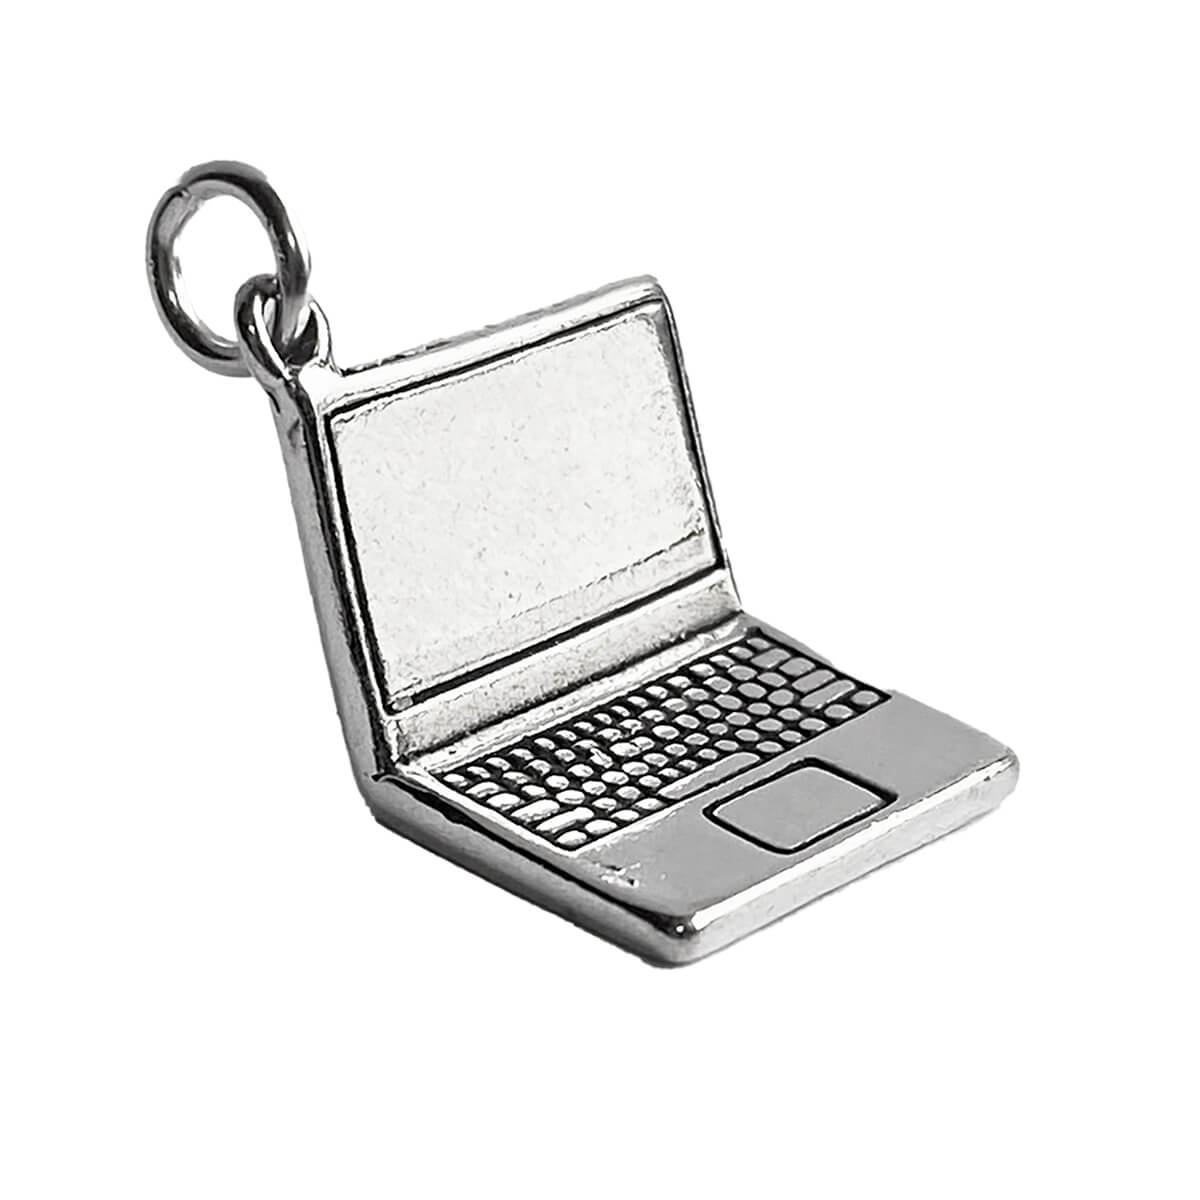 Sterling silver laptop charm computer pendant from Charmarama Charms